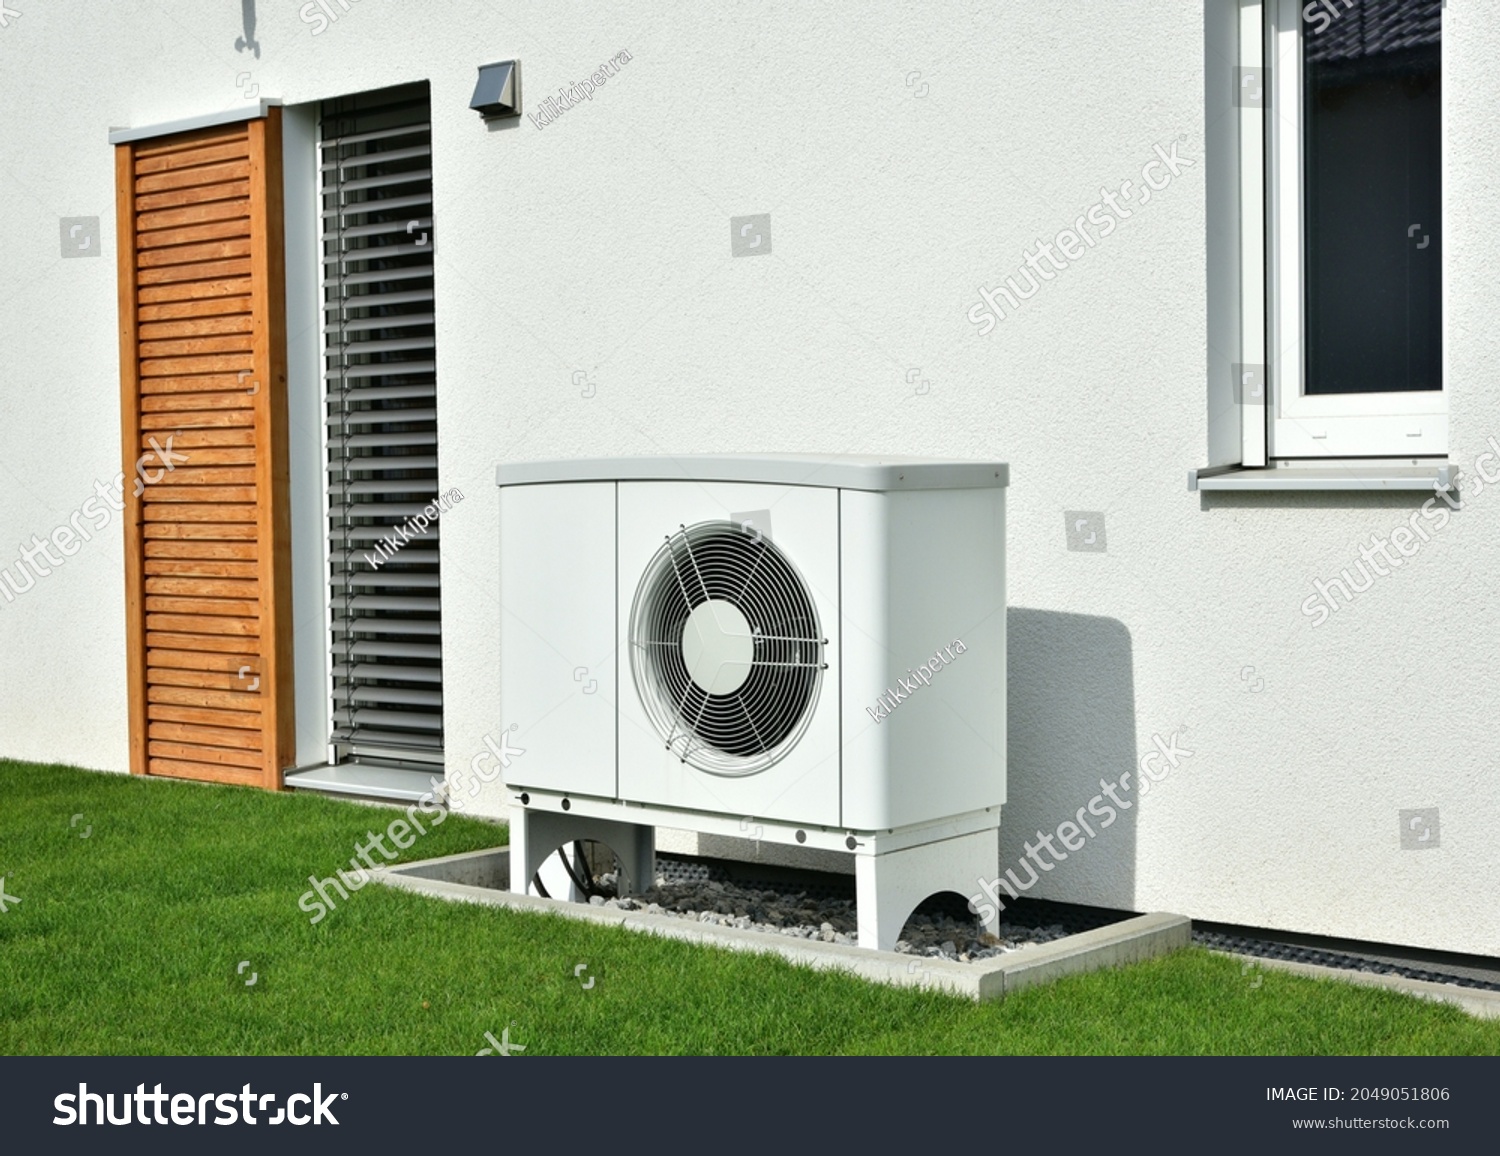 Air-Air Heat Pump for Heating and hot Water in Front of an new built Residential Building #2049051806